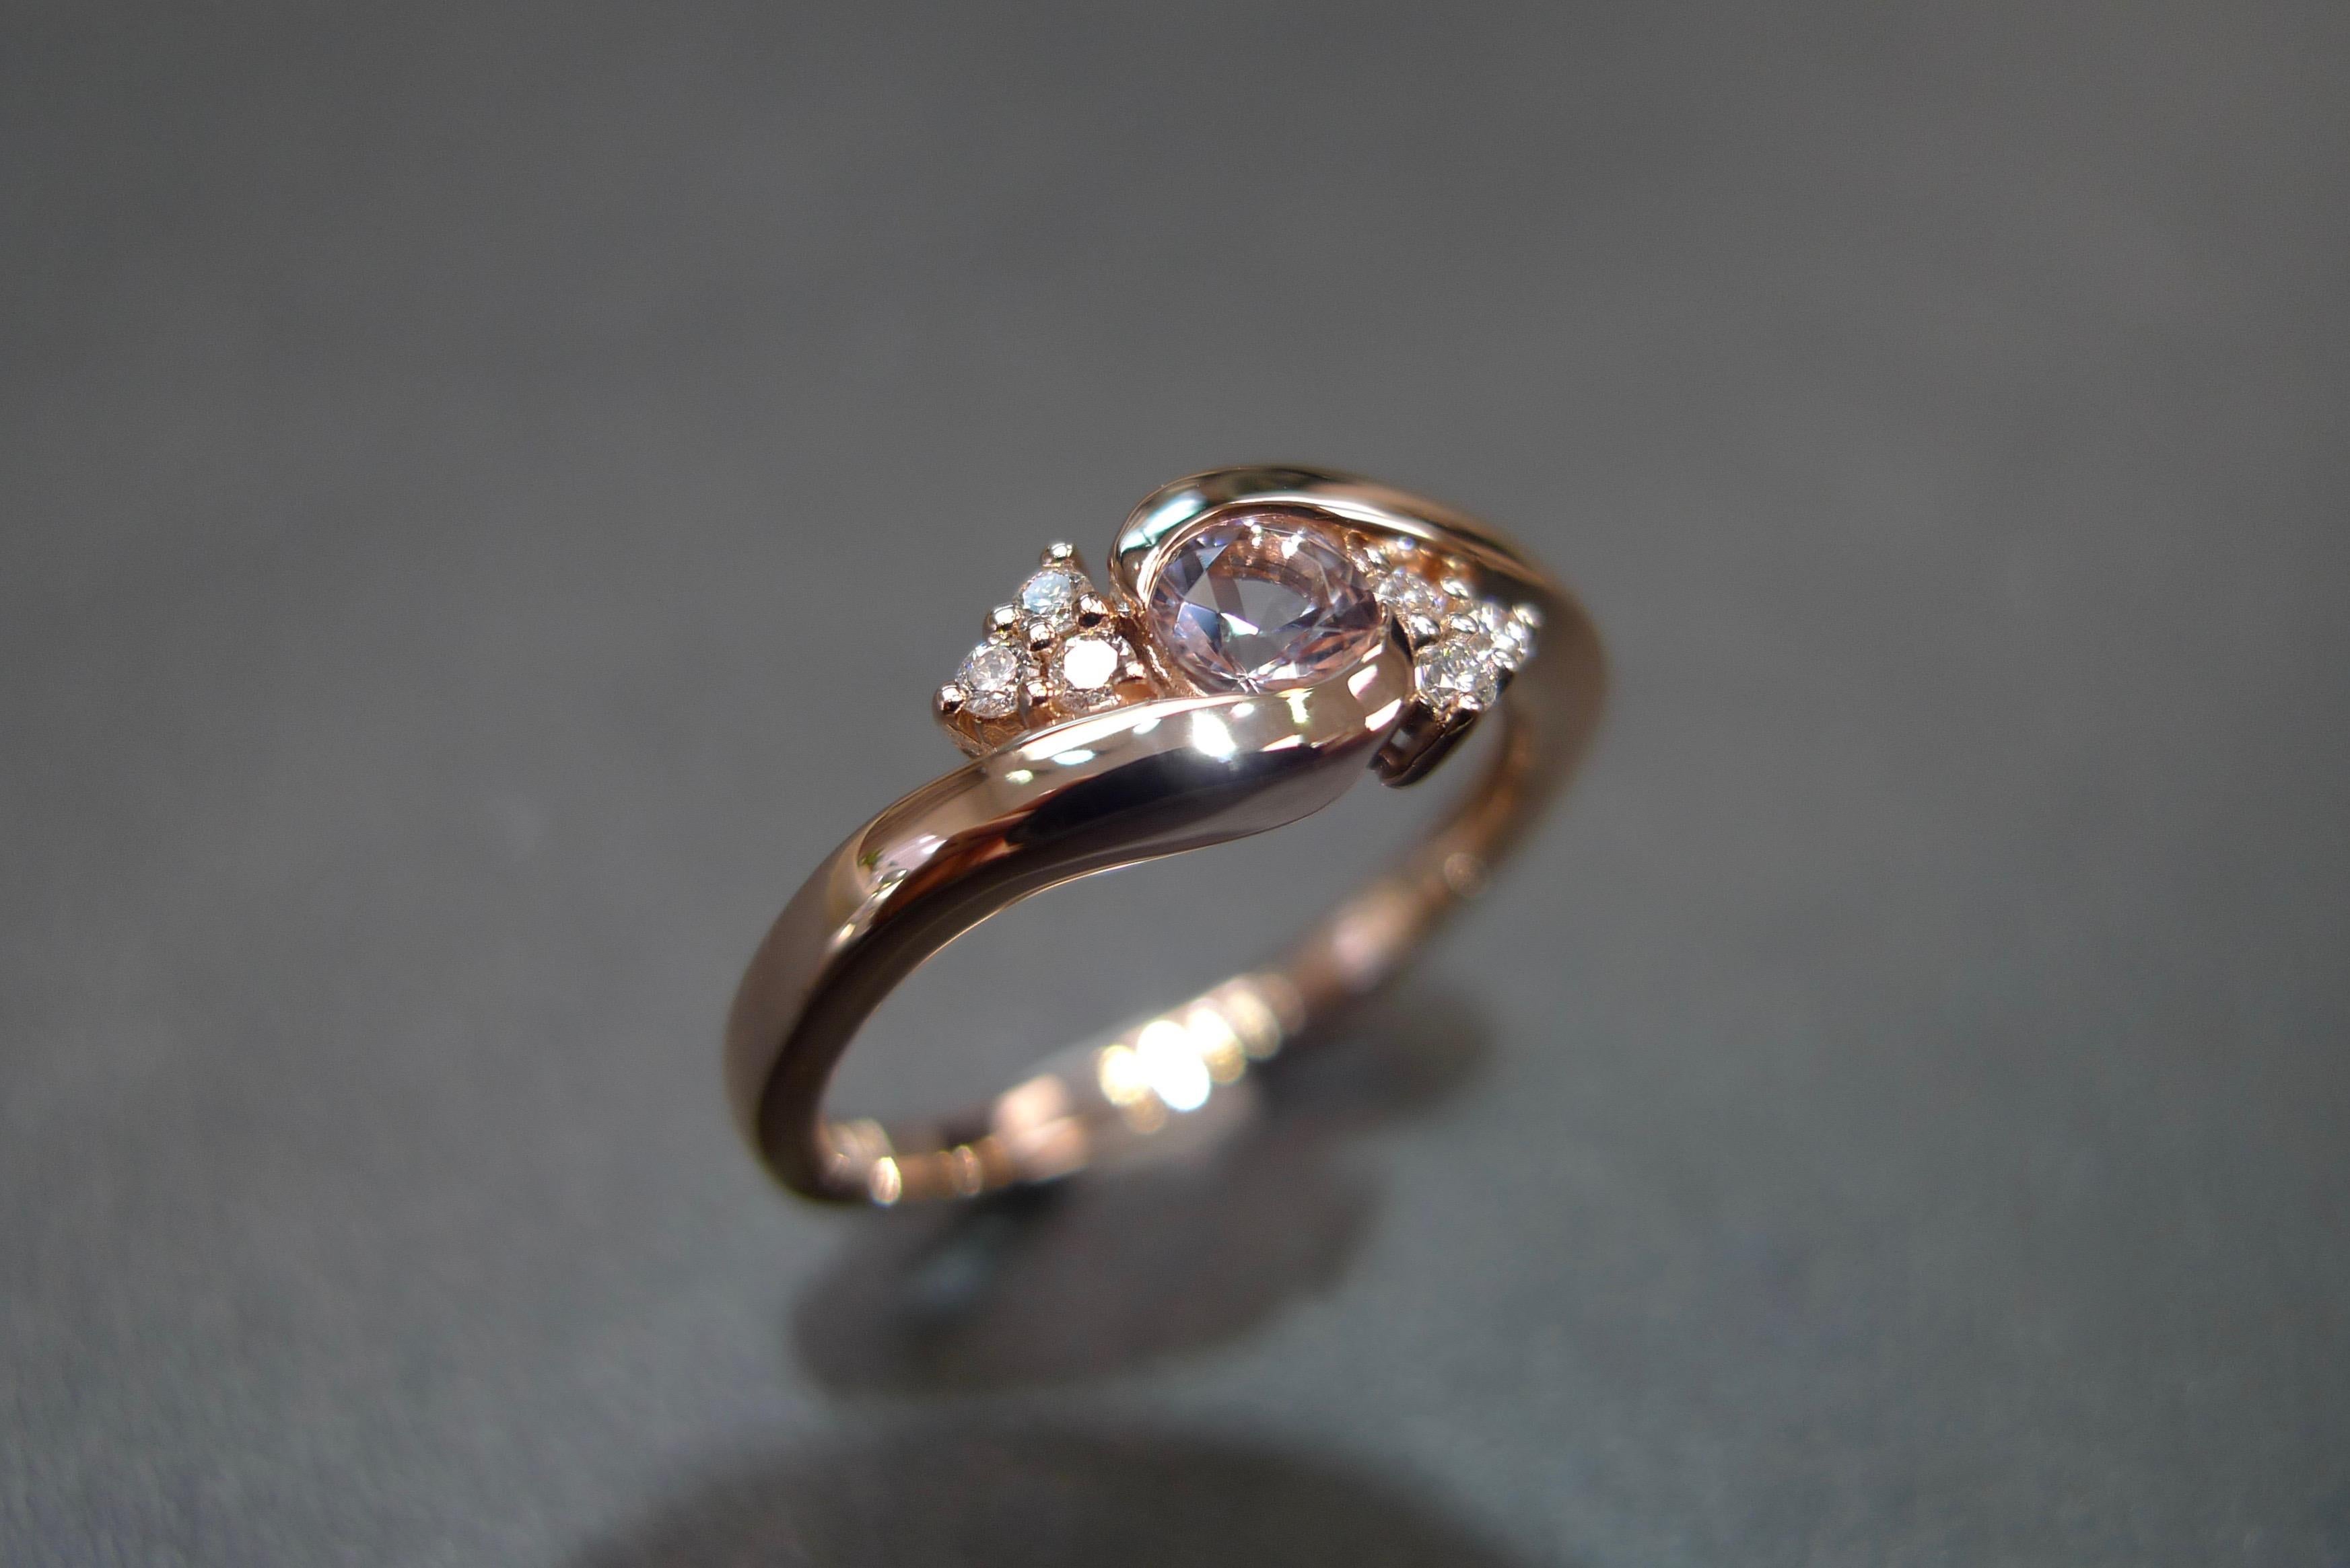 For Sale:  Morganite and Diamonds Twist Tension Ring in 14K Rose Gold 3